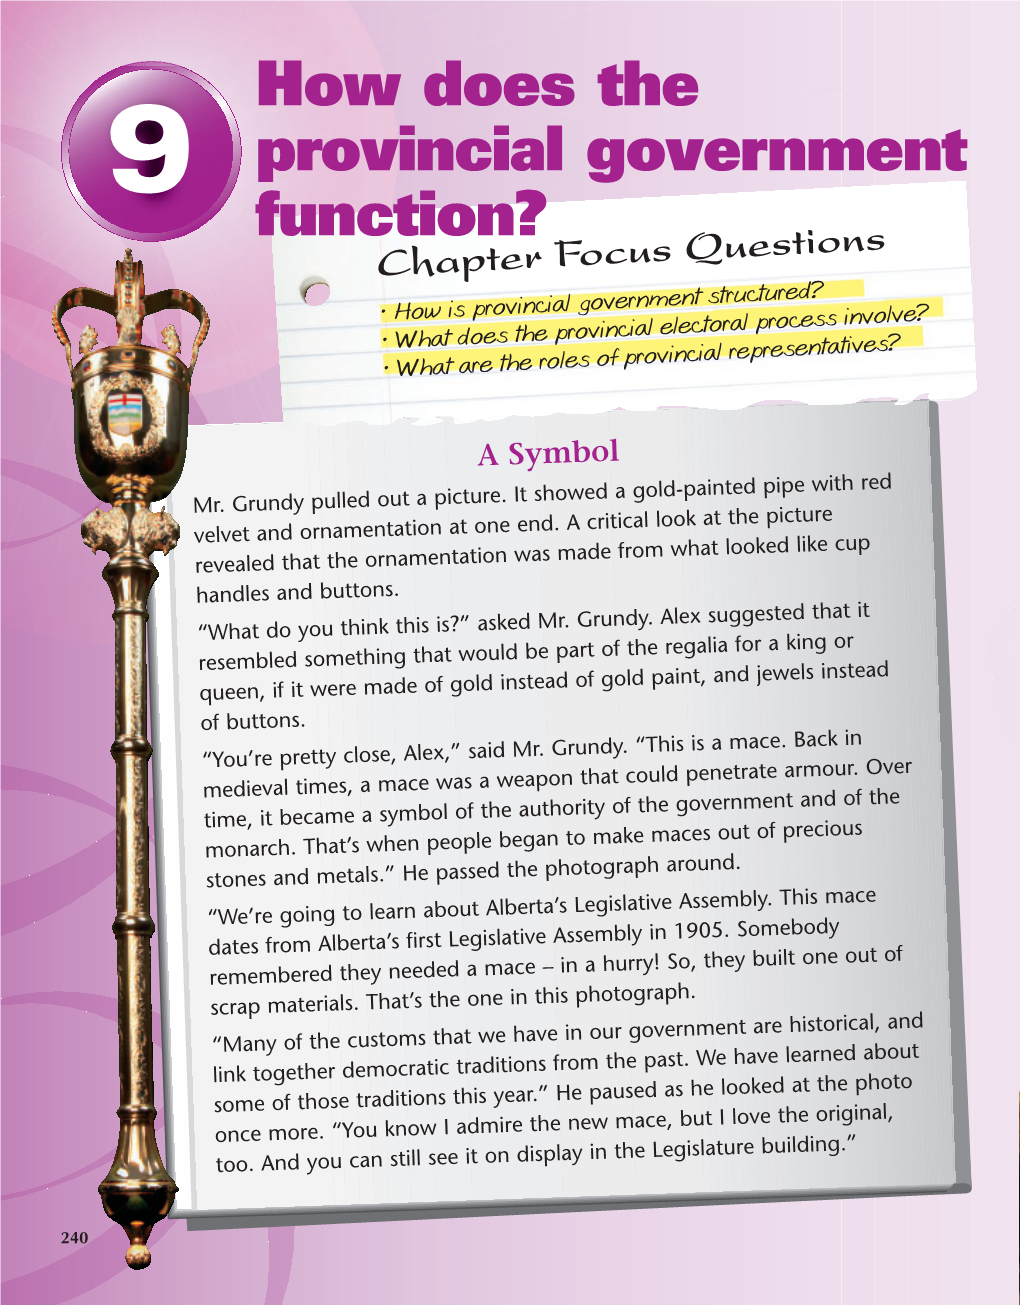 How Does the Provincial Government Function?